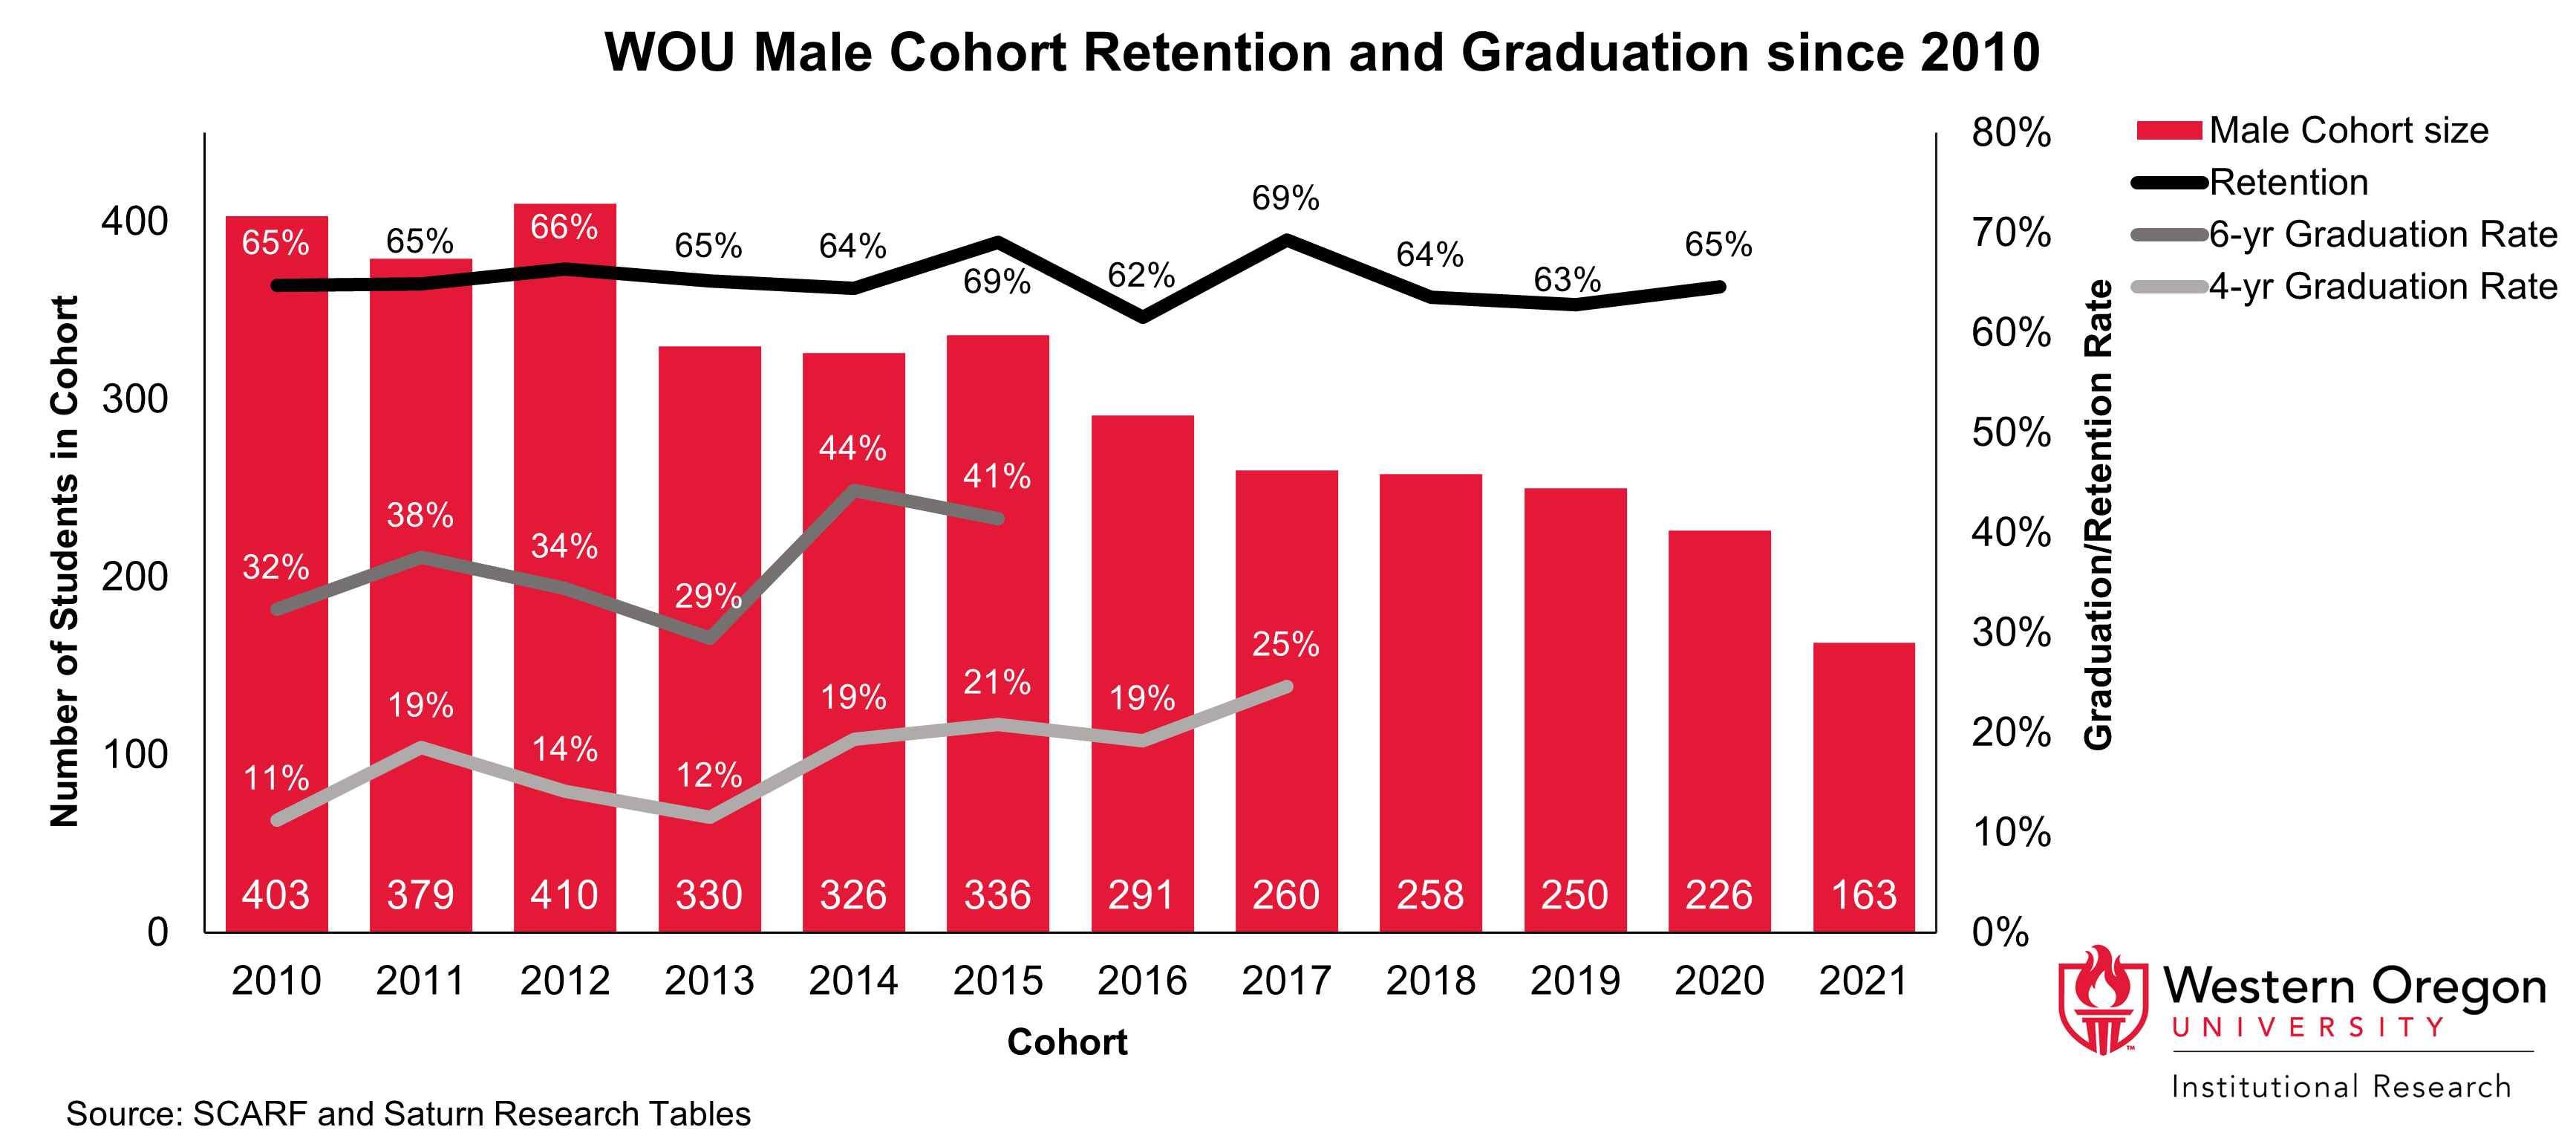 Bar and line graph of retention and 4- and 6-year graduation rates since 2010 for WOU students that are male, showing that graduation rates have been steadily increasing while retention rates have remained largely stable